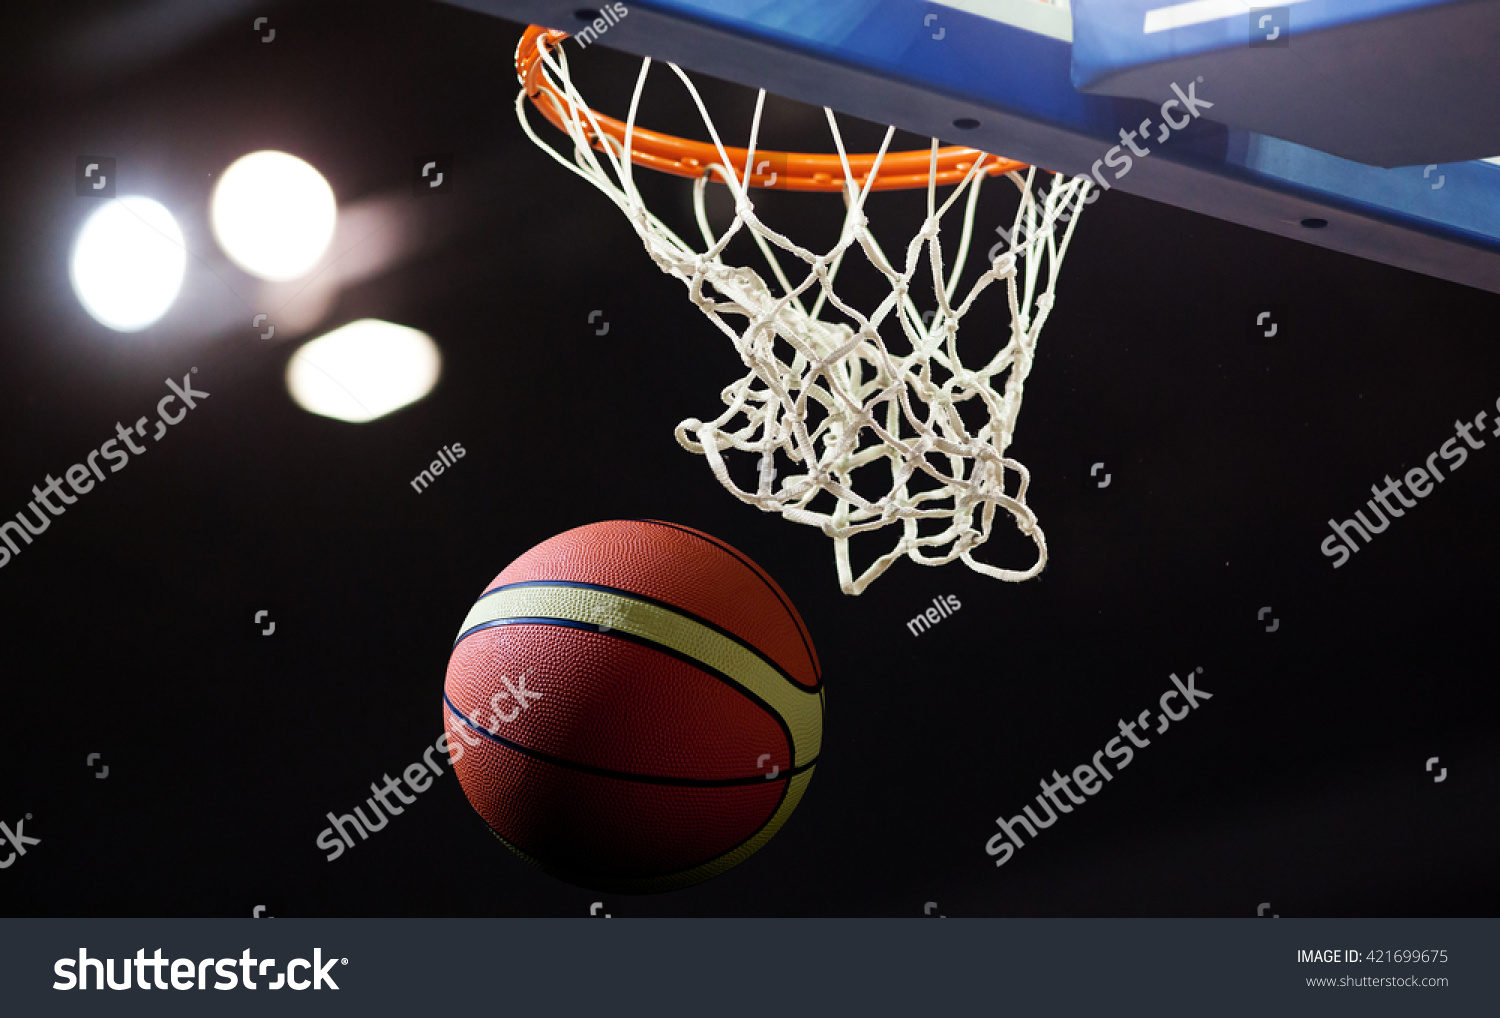 PowerPoint Template march madness basketball ball in hoop (ljinuunom)